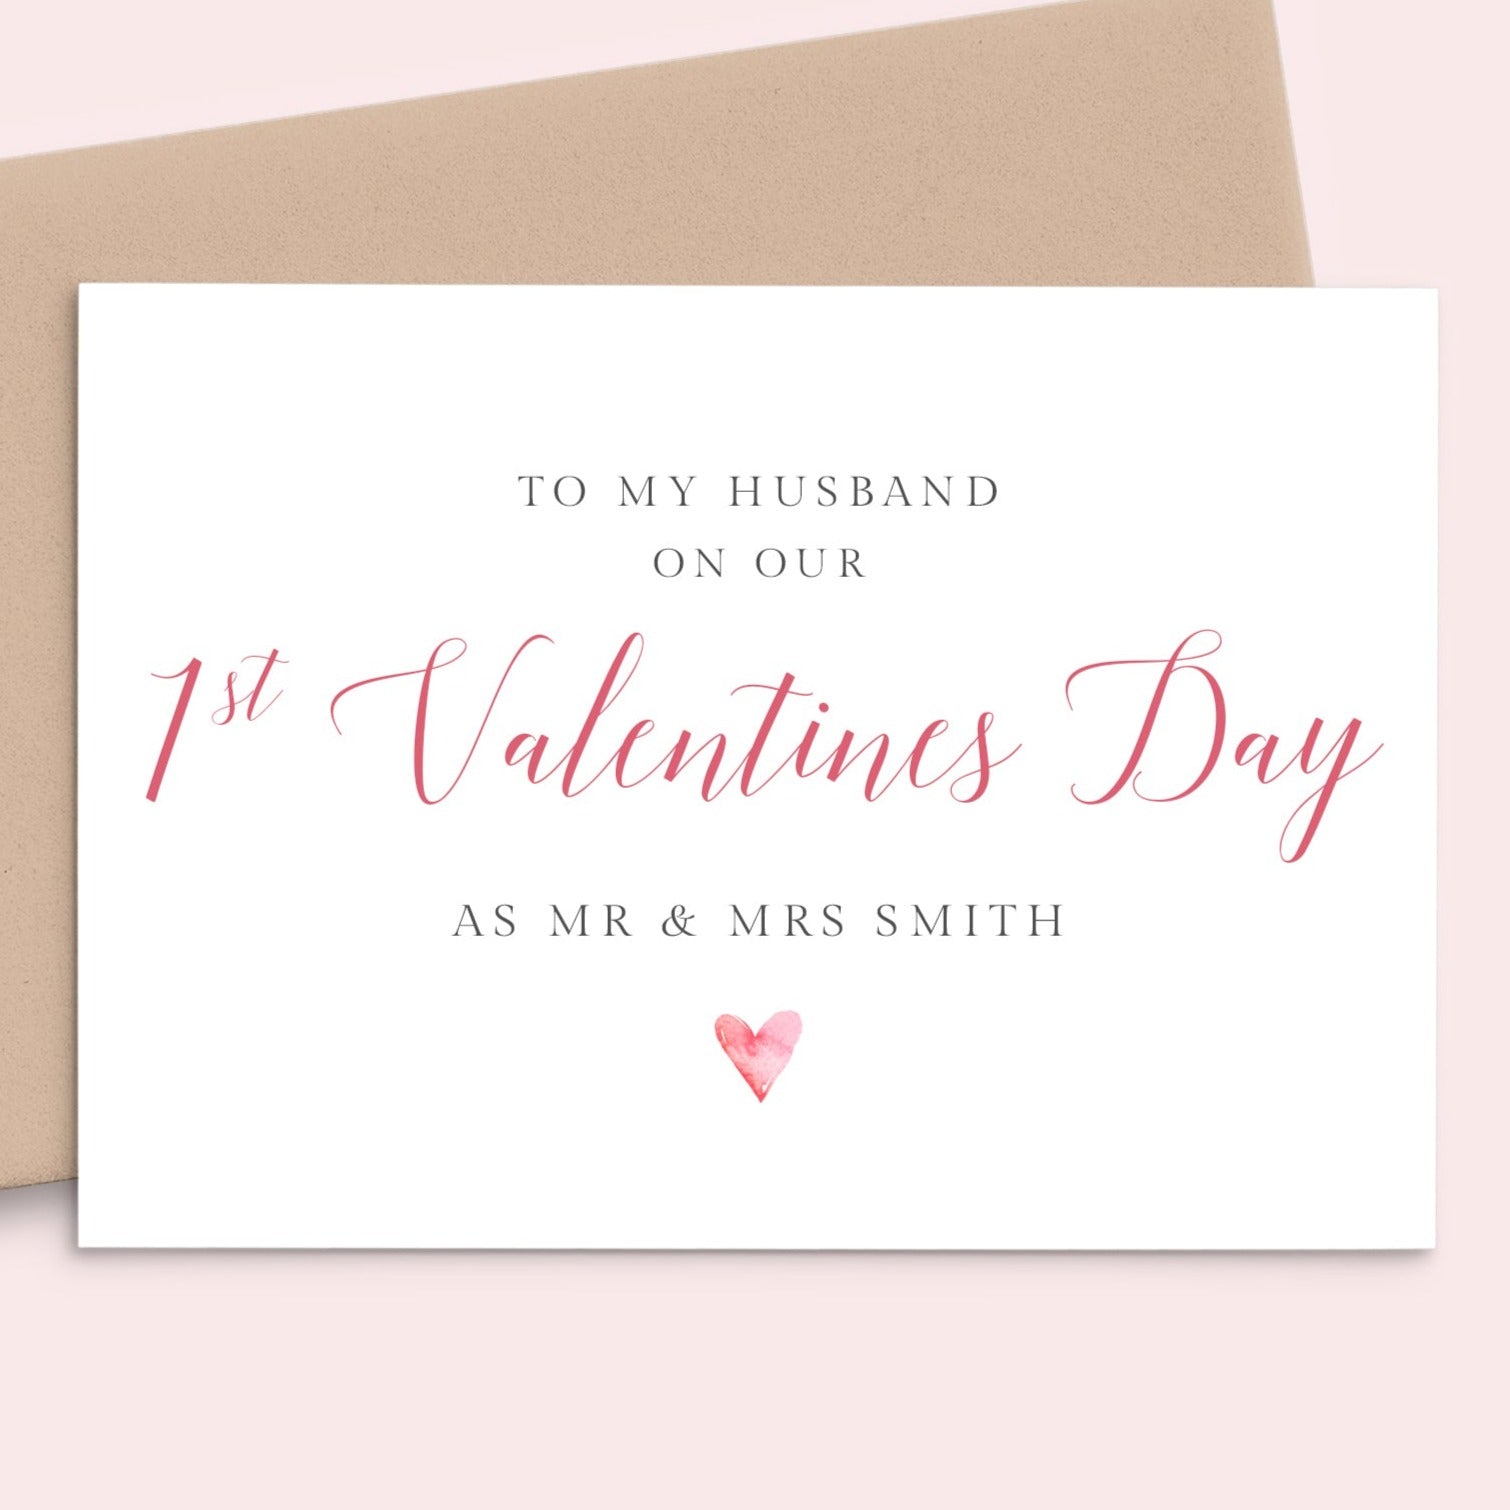 calligraphy 1st valentines day as mr and mrs card husband personalised with name matte white cardstock kraft brown envelope